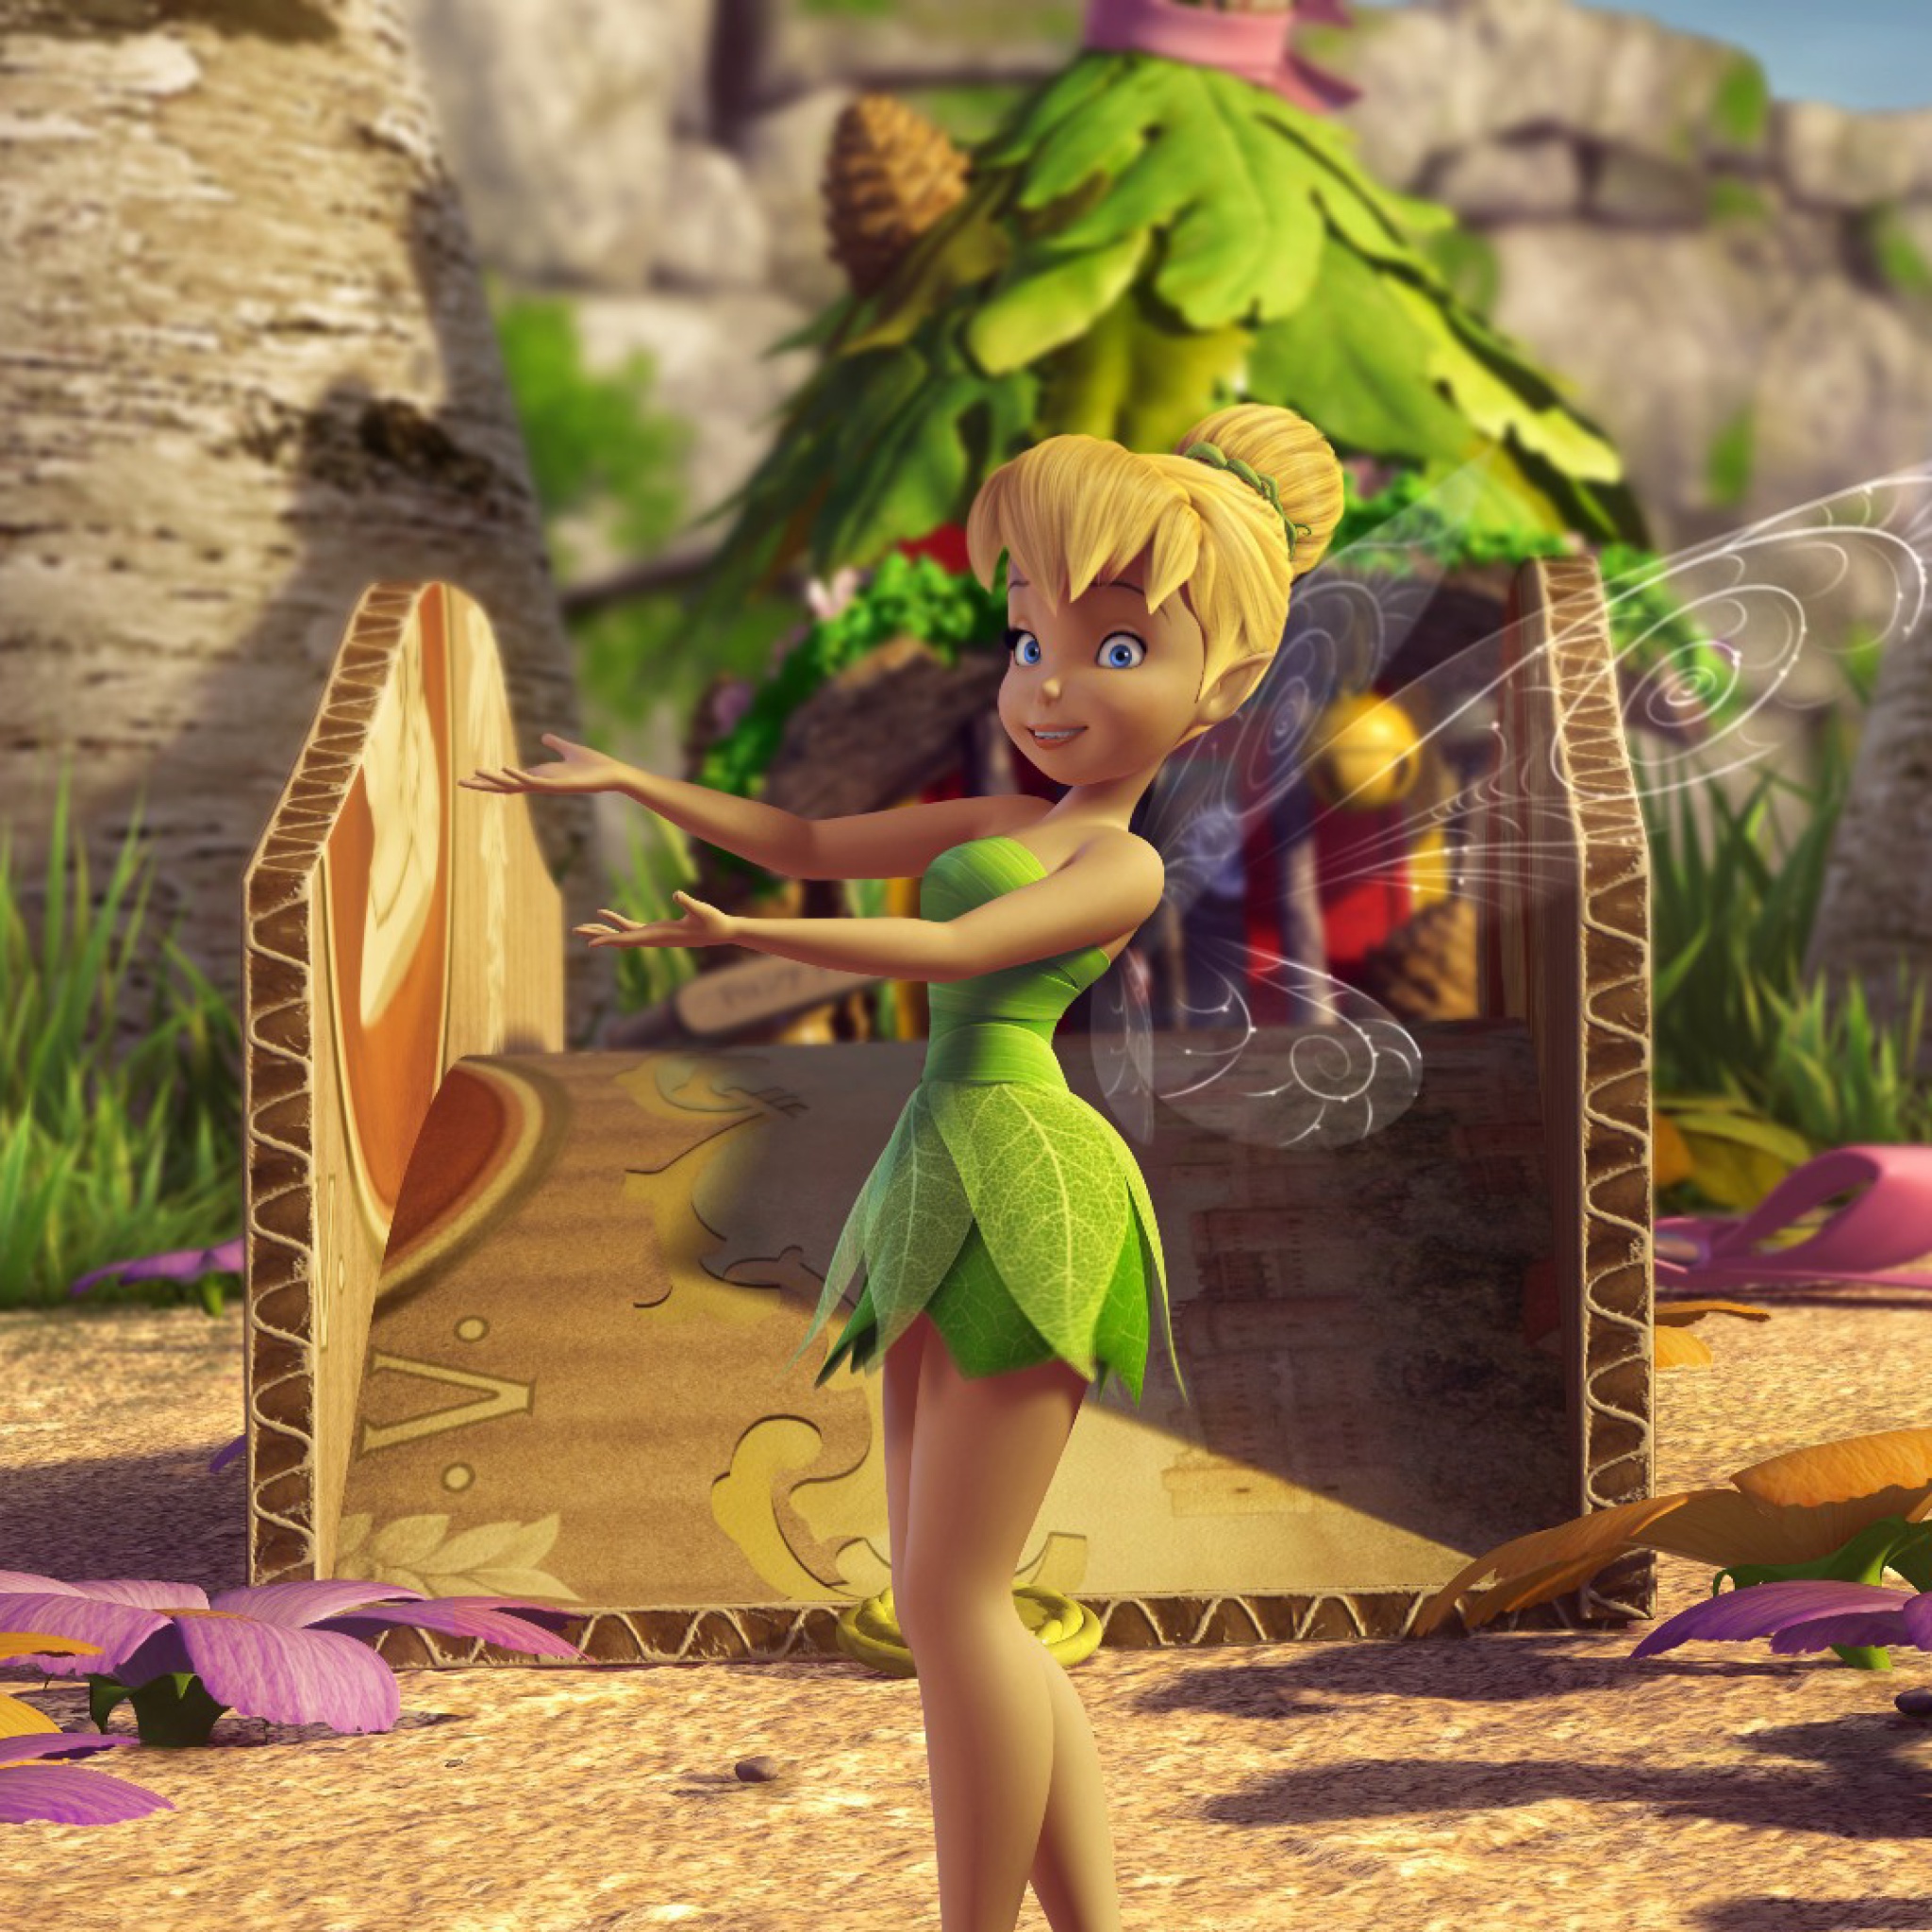 Das Tinker Bell And The Great Fairy Rescue 2 Wallpaper 2048x2048